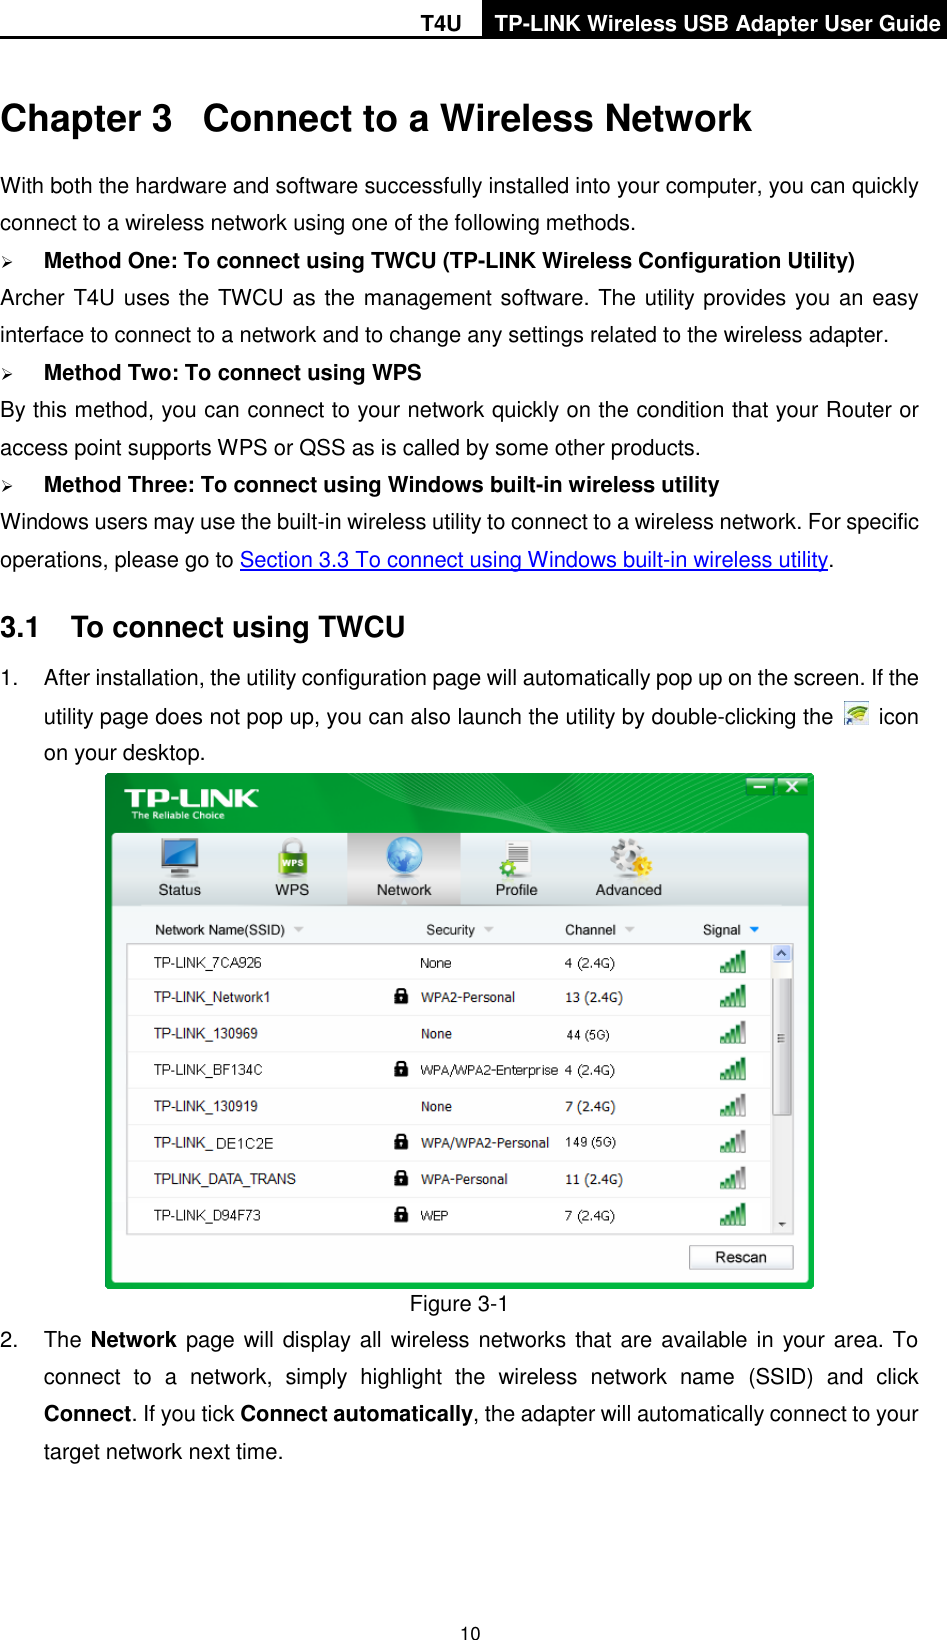 T4U TP-LINK Wireless USB Adapter User Guide   10 Chapter 3  Connect to a Wireless Network With both the hardware and software successfully installed into your computer, you can quickly connect to a wireless network using one of the following methods.  Method One: To connect using TWCU (TP-LINK Wireless Configuration Utility) Archer T4U uses the TWCU as the management software. The utility provides you an easy interface to connect to a network and to change any settings related to the wireless adapter.    Method Two: To connect using WPS By this method, you can connect to your network quickly on the condition that your Router or access point supports WPS or QSS as is called by some other products.    Method Three: To connect using Windows built-in wireless utility Windows users may use the built-in wireless utility to connect to a wireless network. For specific operations, please go to Section 3.3 To connect using Windows built-in wireless utility. 3.1  To connect using TWCU 1.  After installation, the utility configuration page will automatically pop up on the screen. If the utility page does not pop up, you can also launch the utility by double-clicking the    icon on your desktop.    Figure 3-1 2.  The Network page will display all wireless networks that are available in your area. To connect  to  a  network,  simply  highlight  the  wireless  network  name  (SSID)  and  click Connect. If you tick Connect automatically, the adapter will automatically connect to your target network next time. 